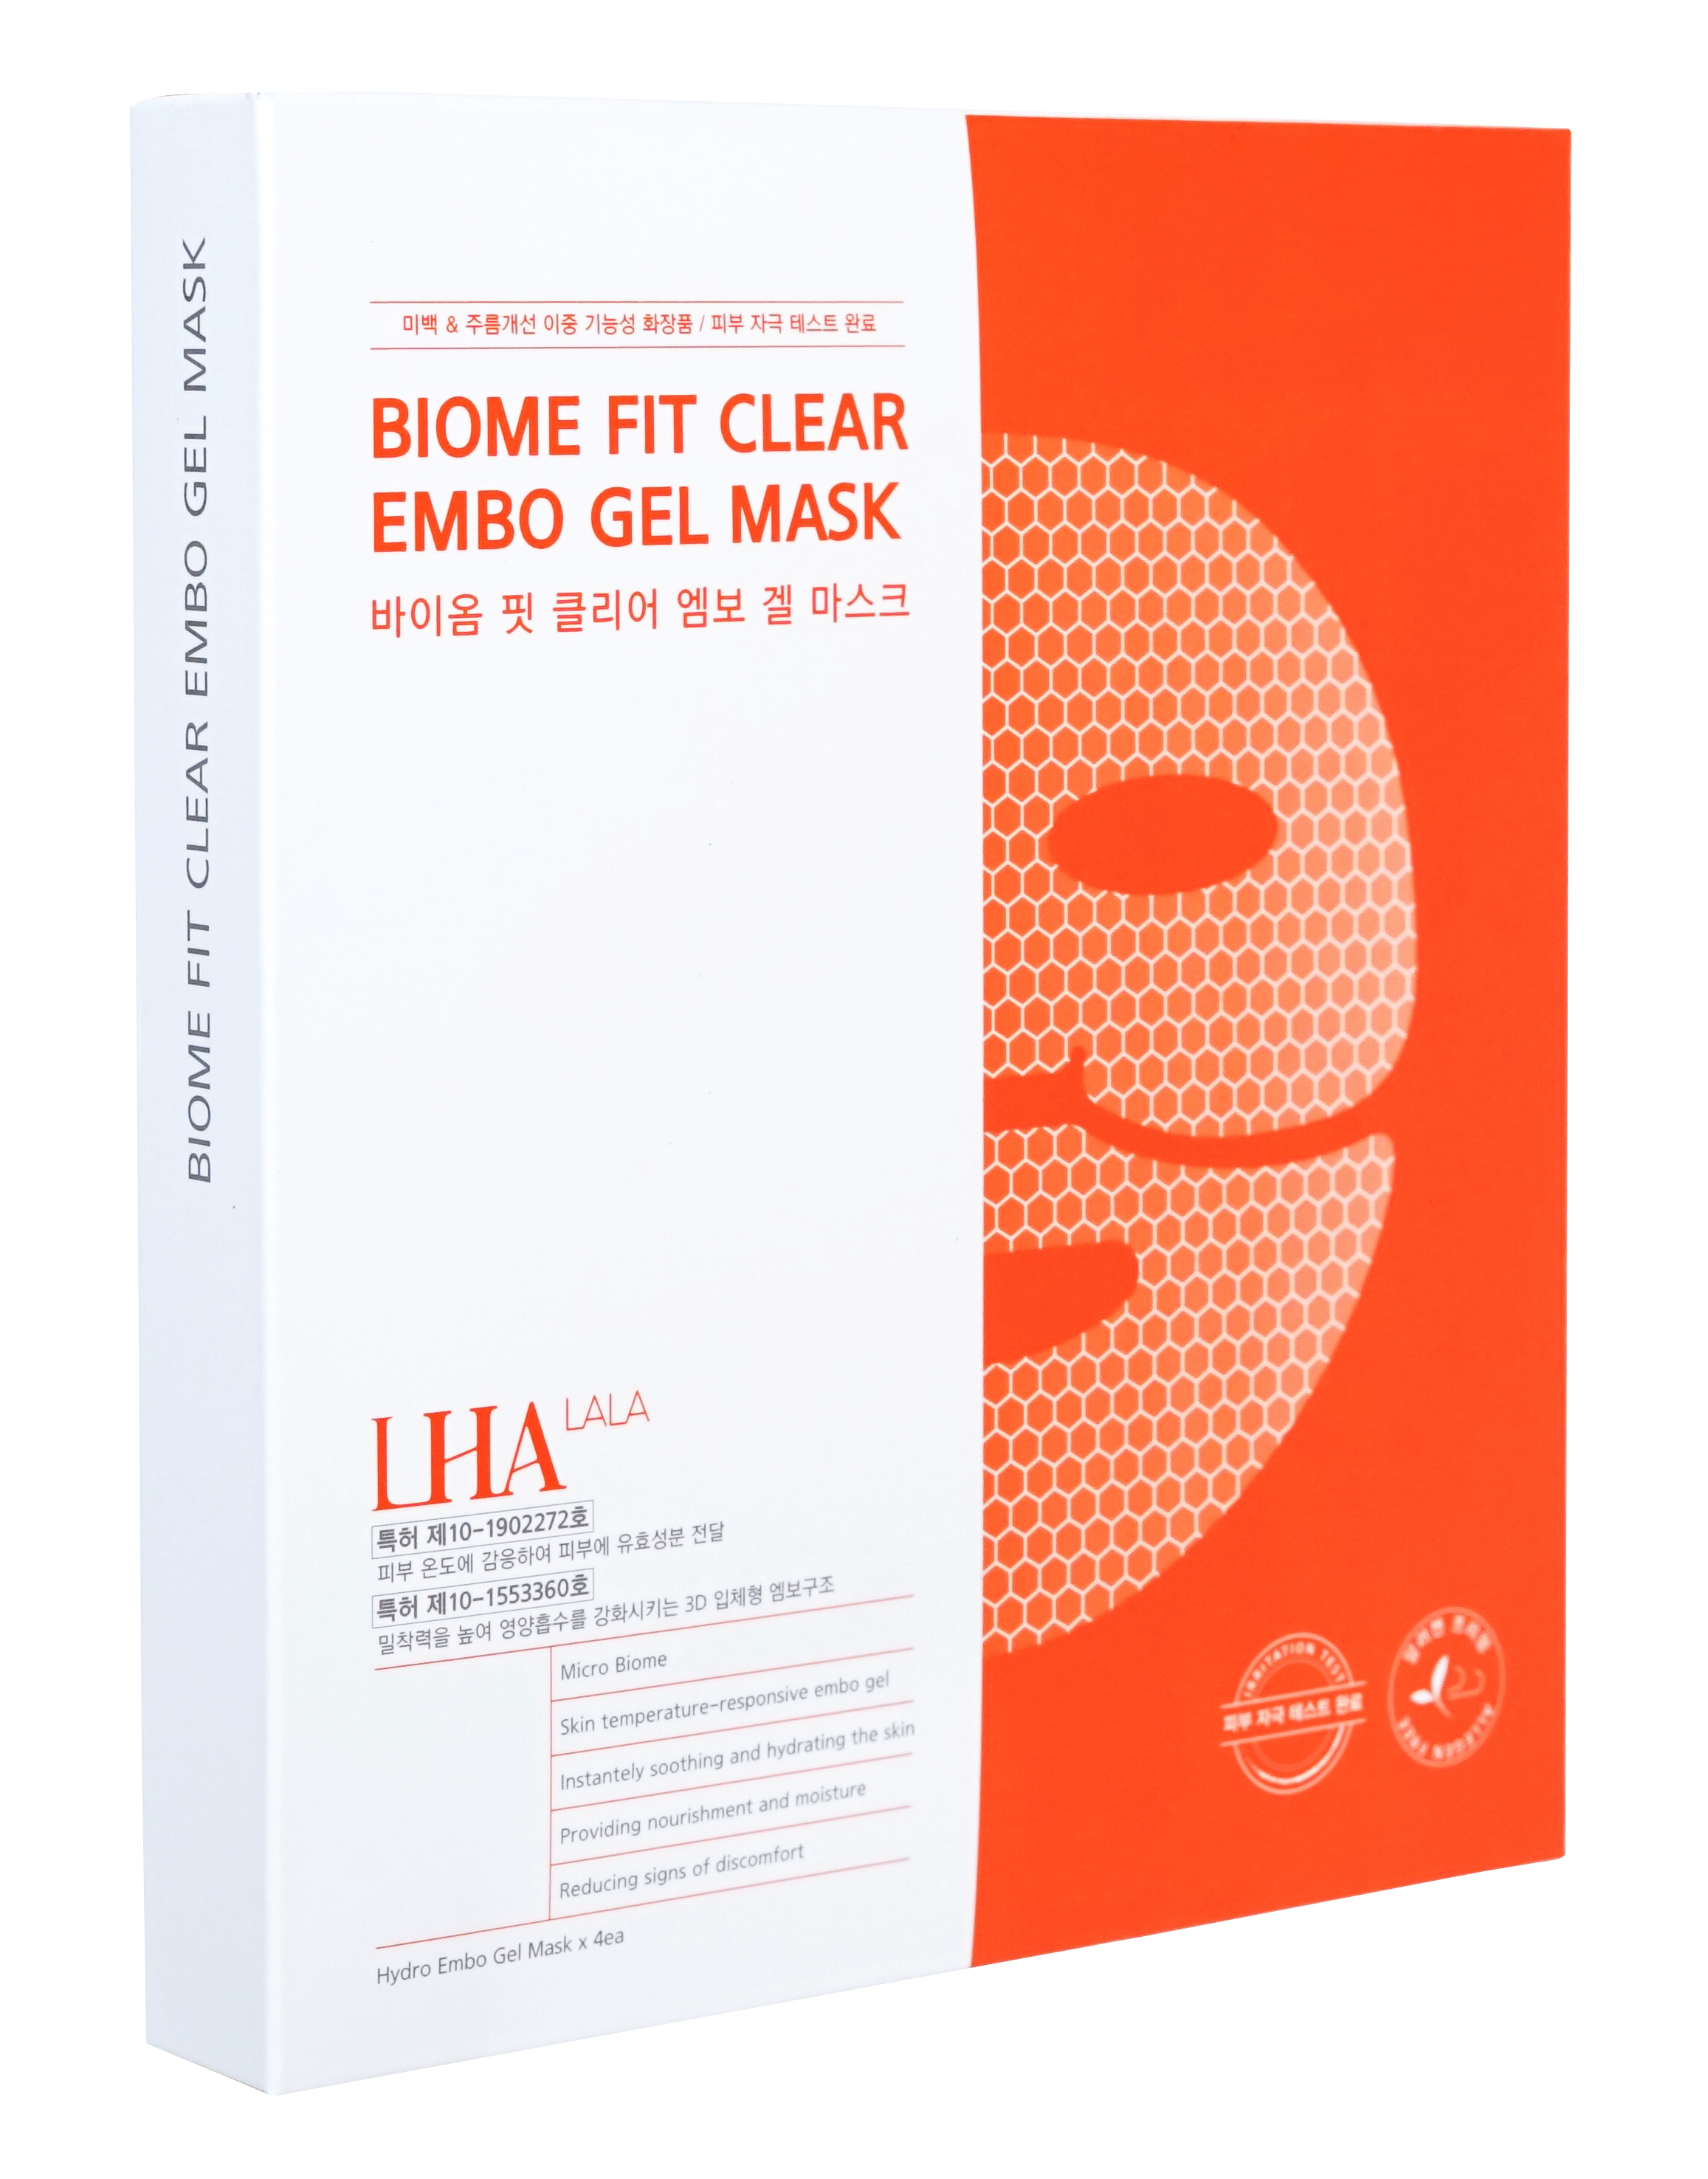 LHALALA BIOME FIT CLEAR EMBO GEL MASK